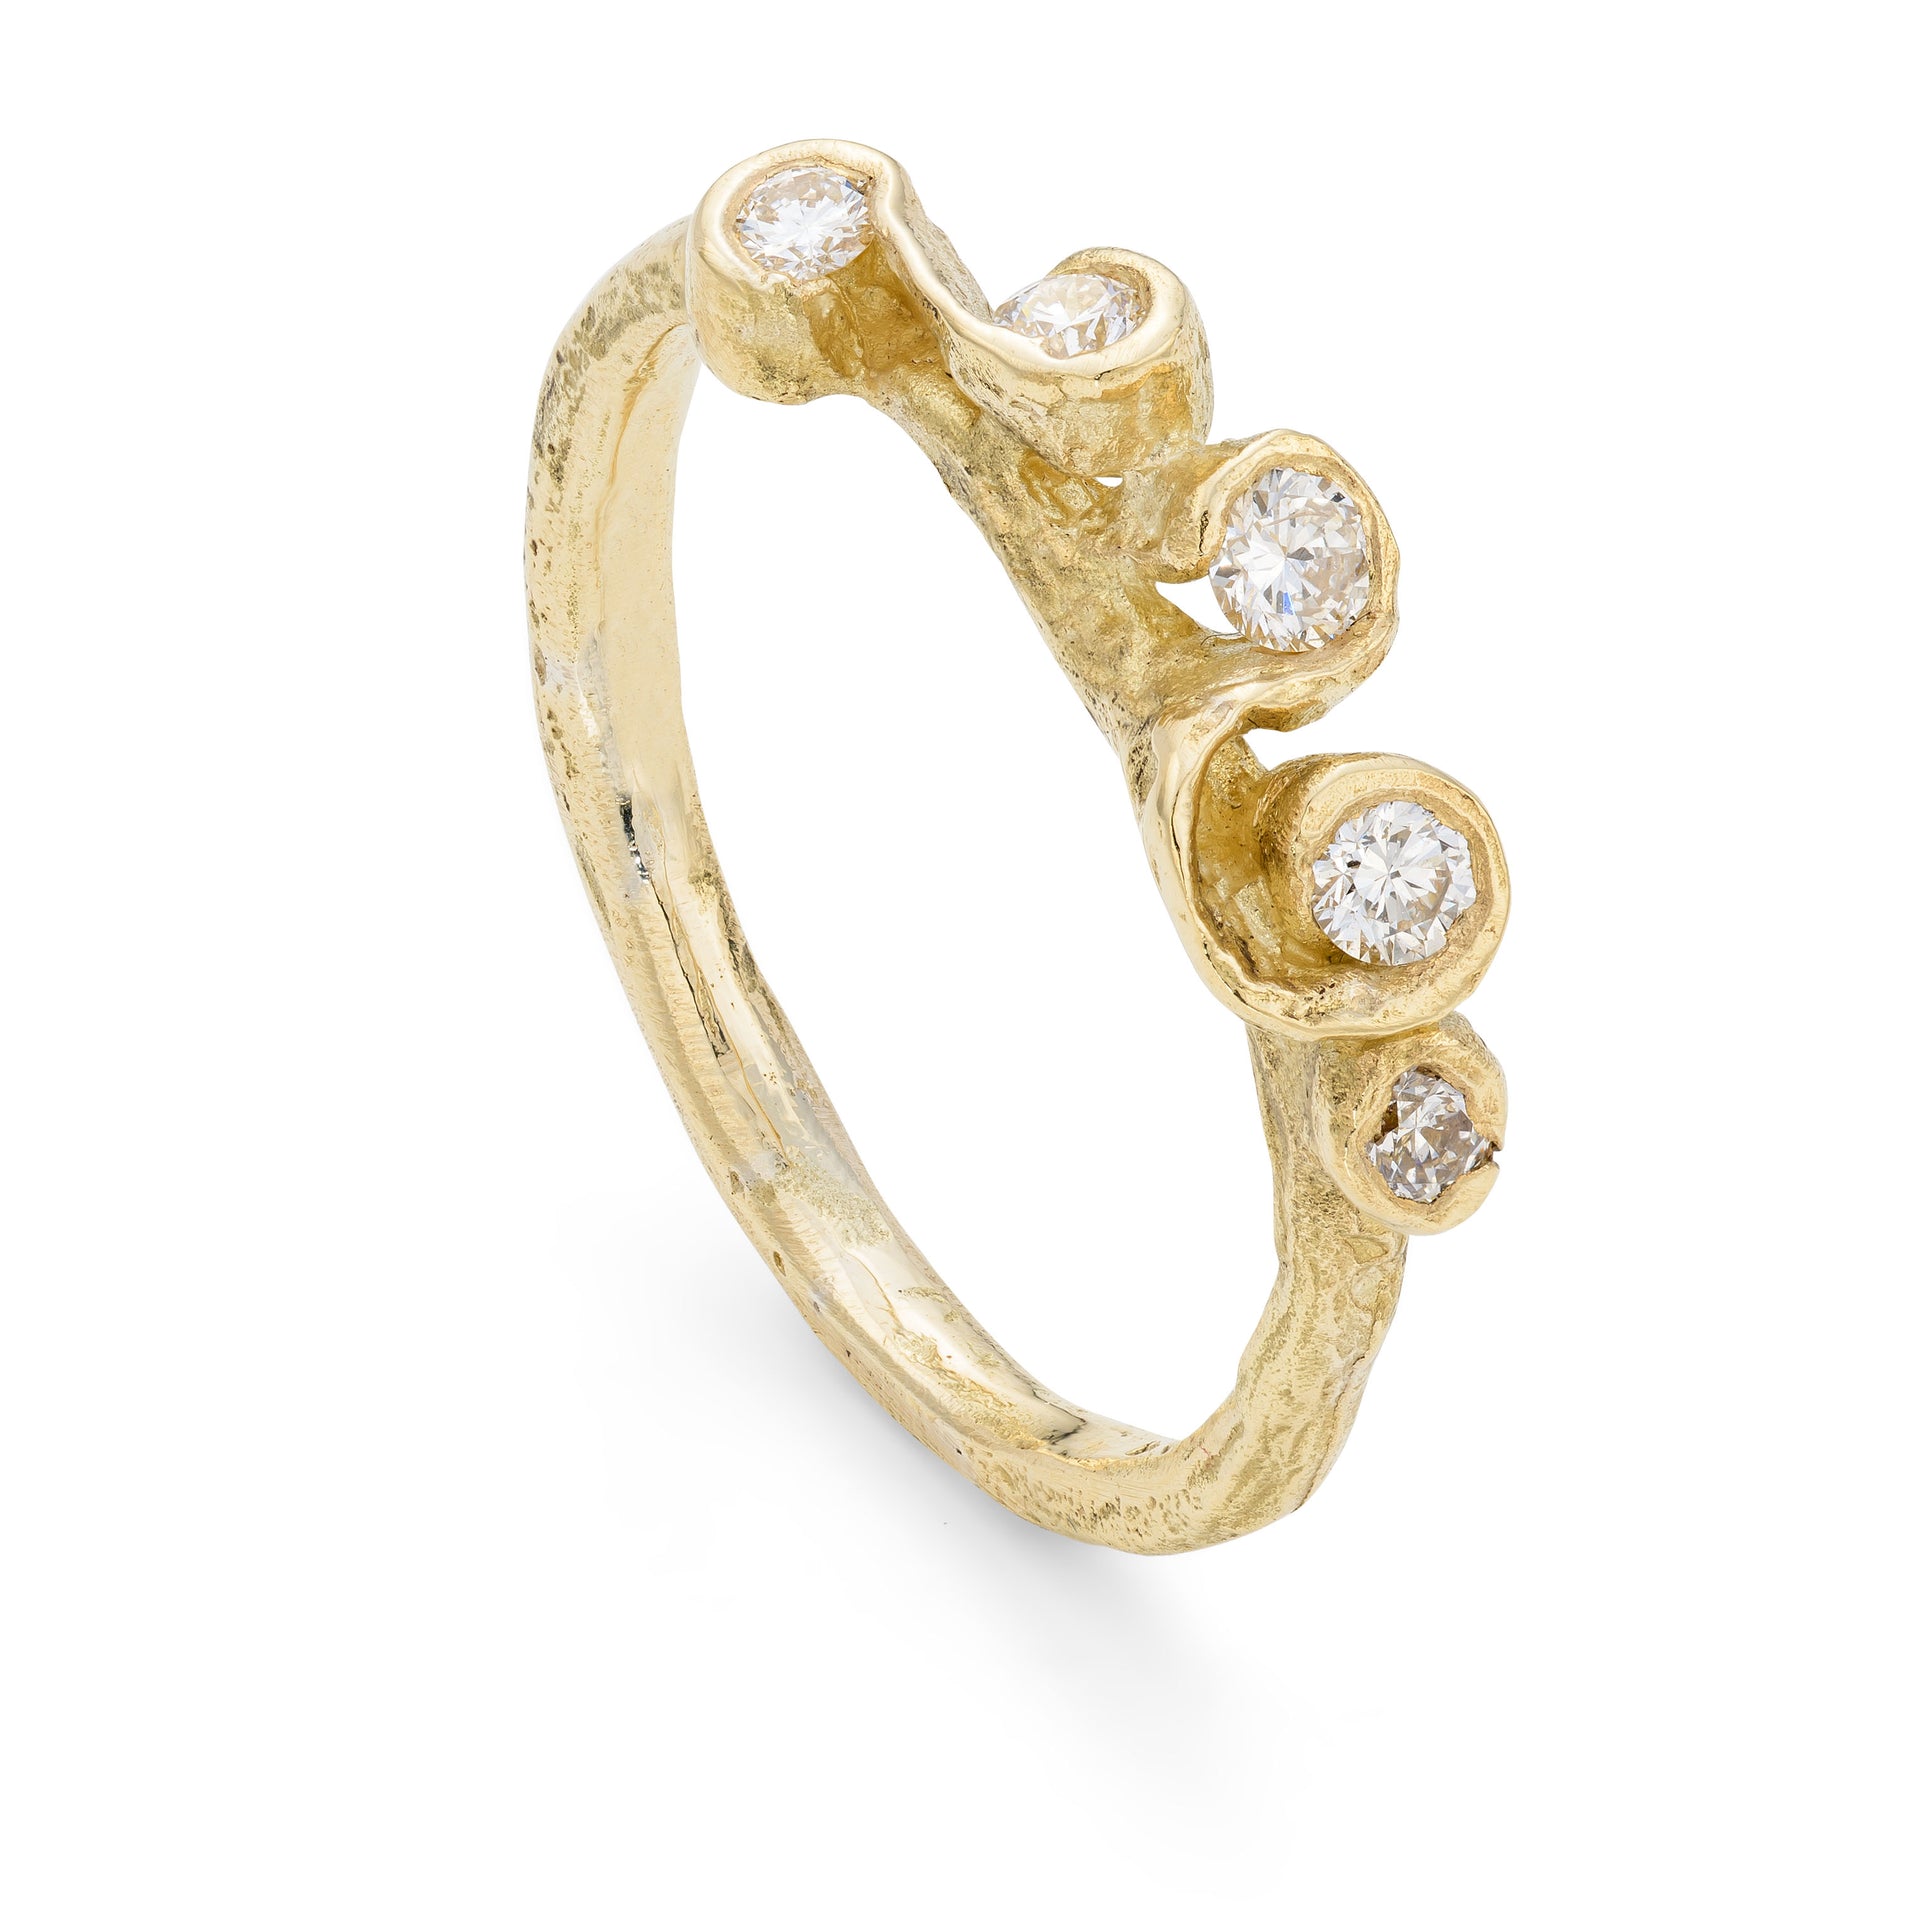 Upright front view of a sea worn textured engagement ring, set with 5 diamonds in an unusual design.